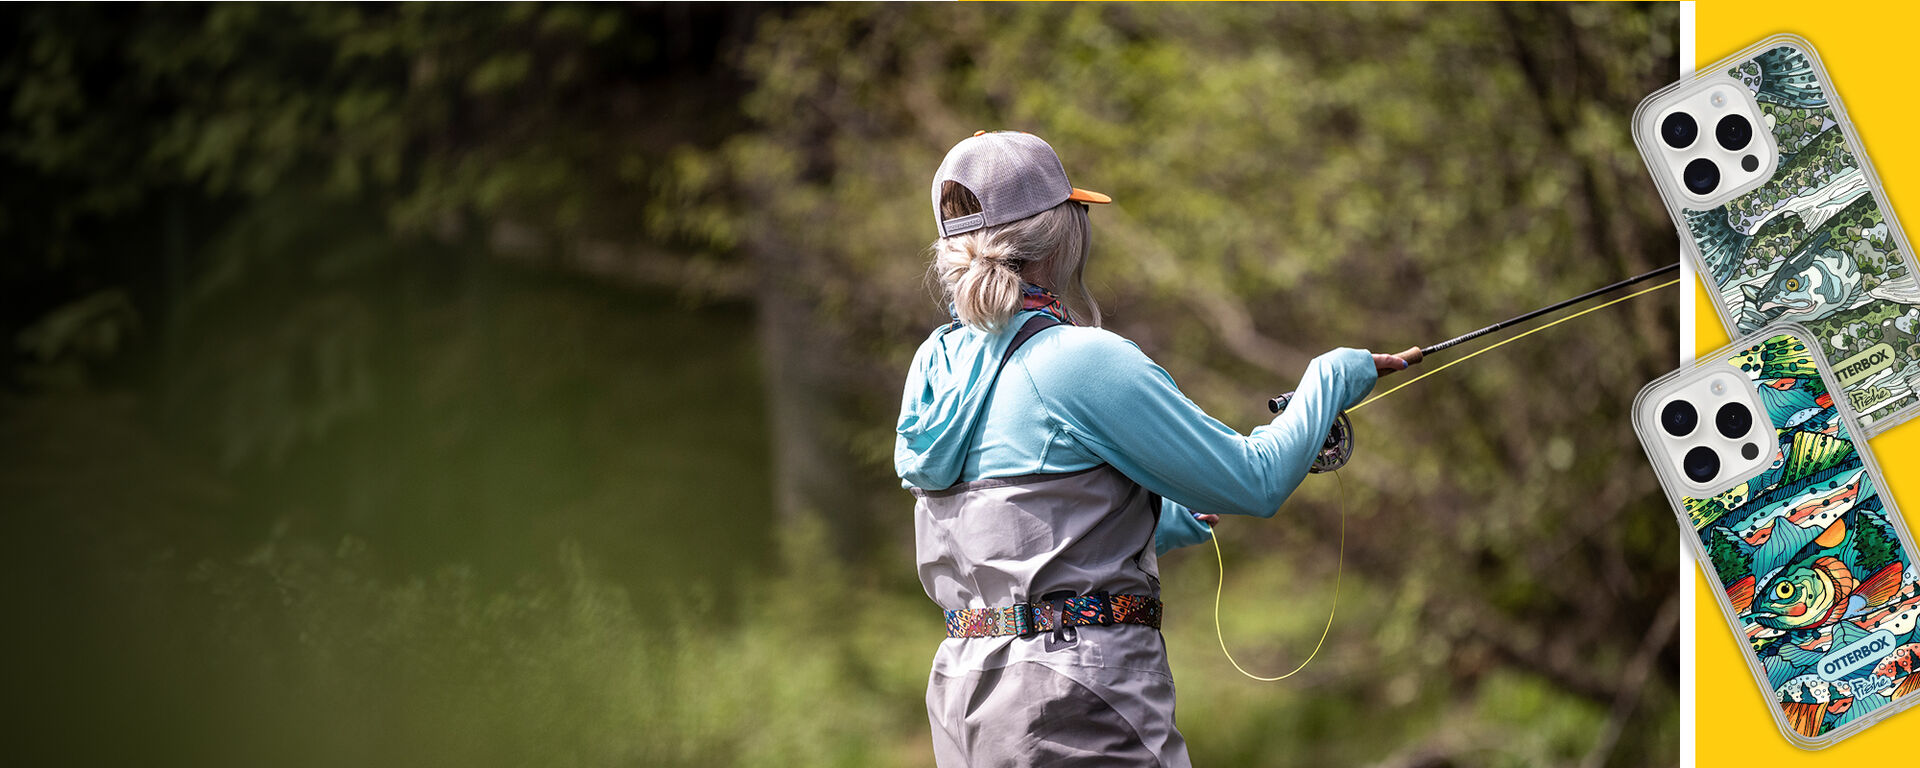 Girl fly fishing in bright colored Fishe gear